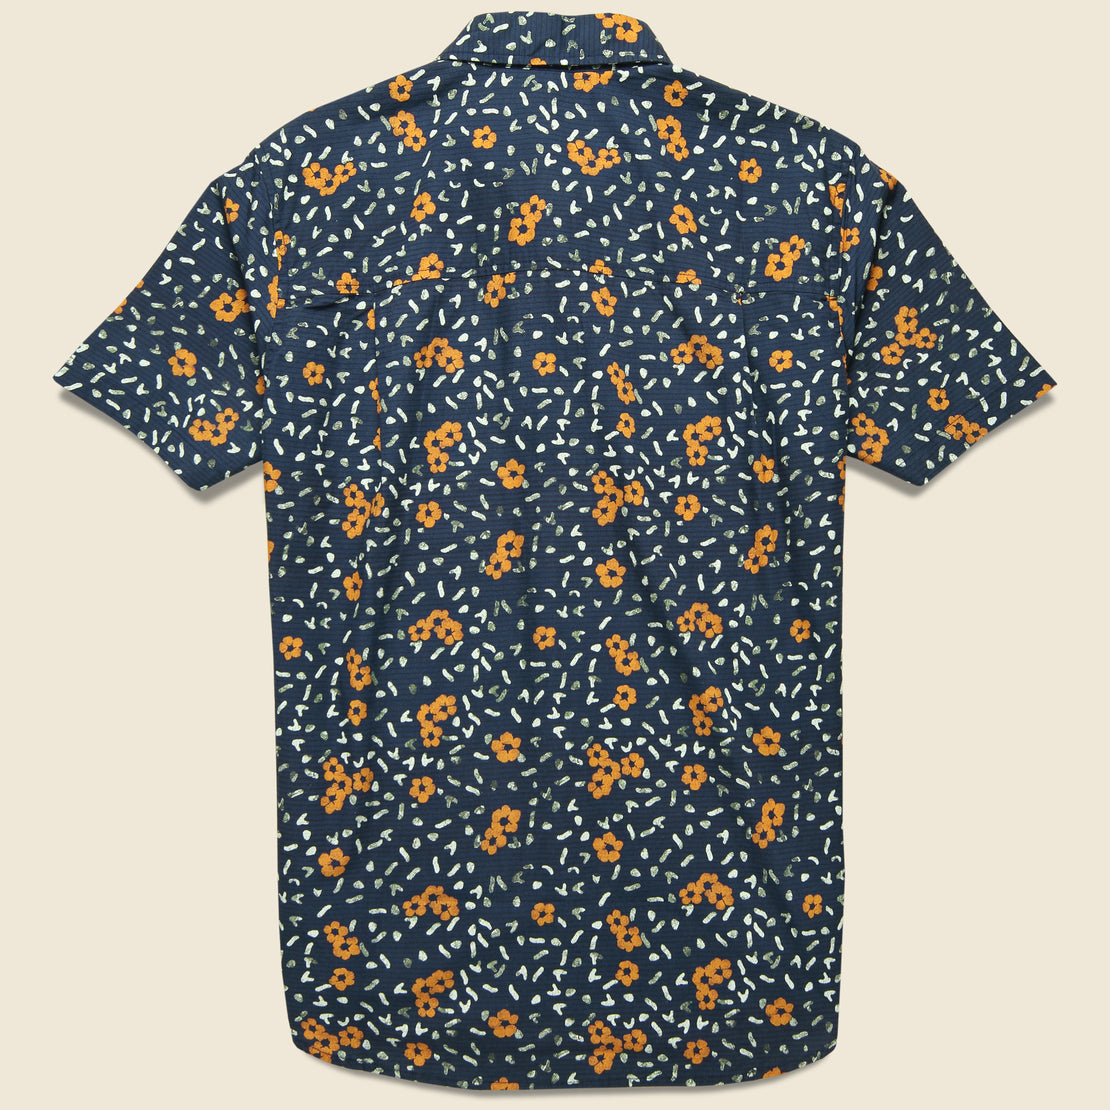 Harbor Shirt - Navy Hibiscus Print - Bridge & Burn - STAG Provisions - Tops - S/S Woven - Other Pattern